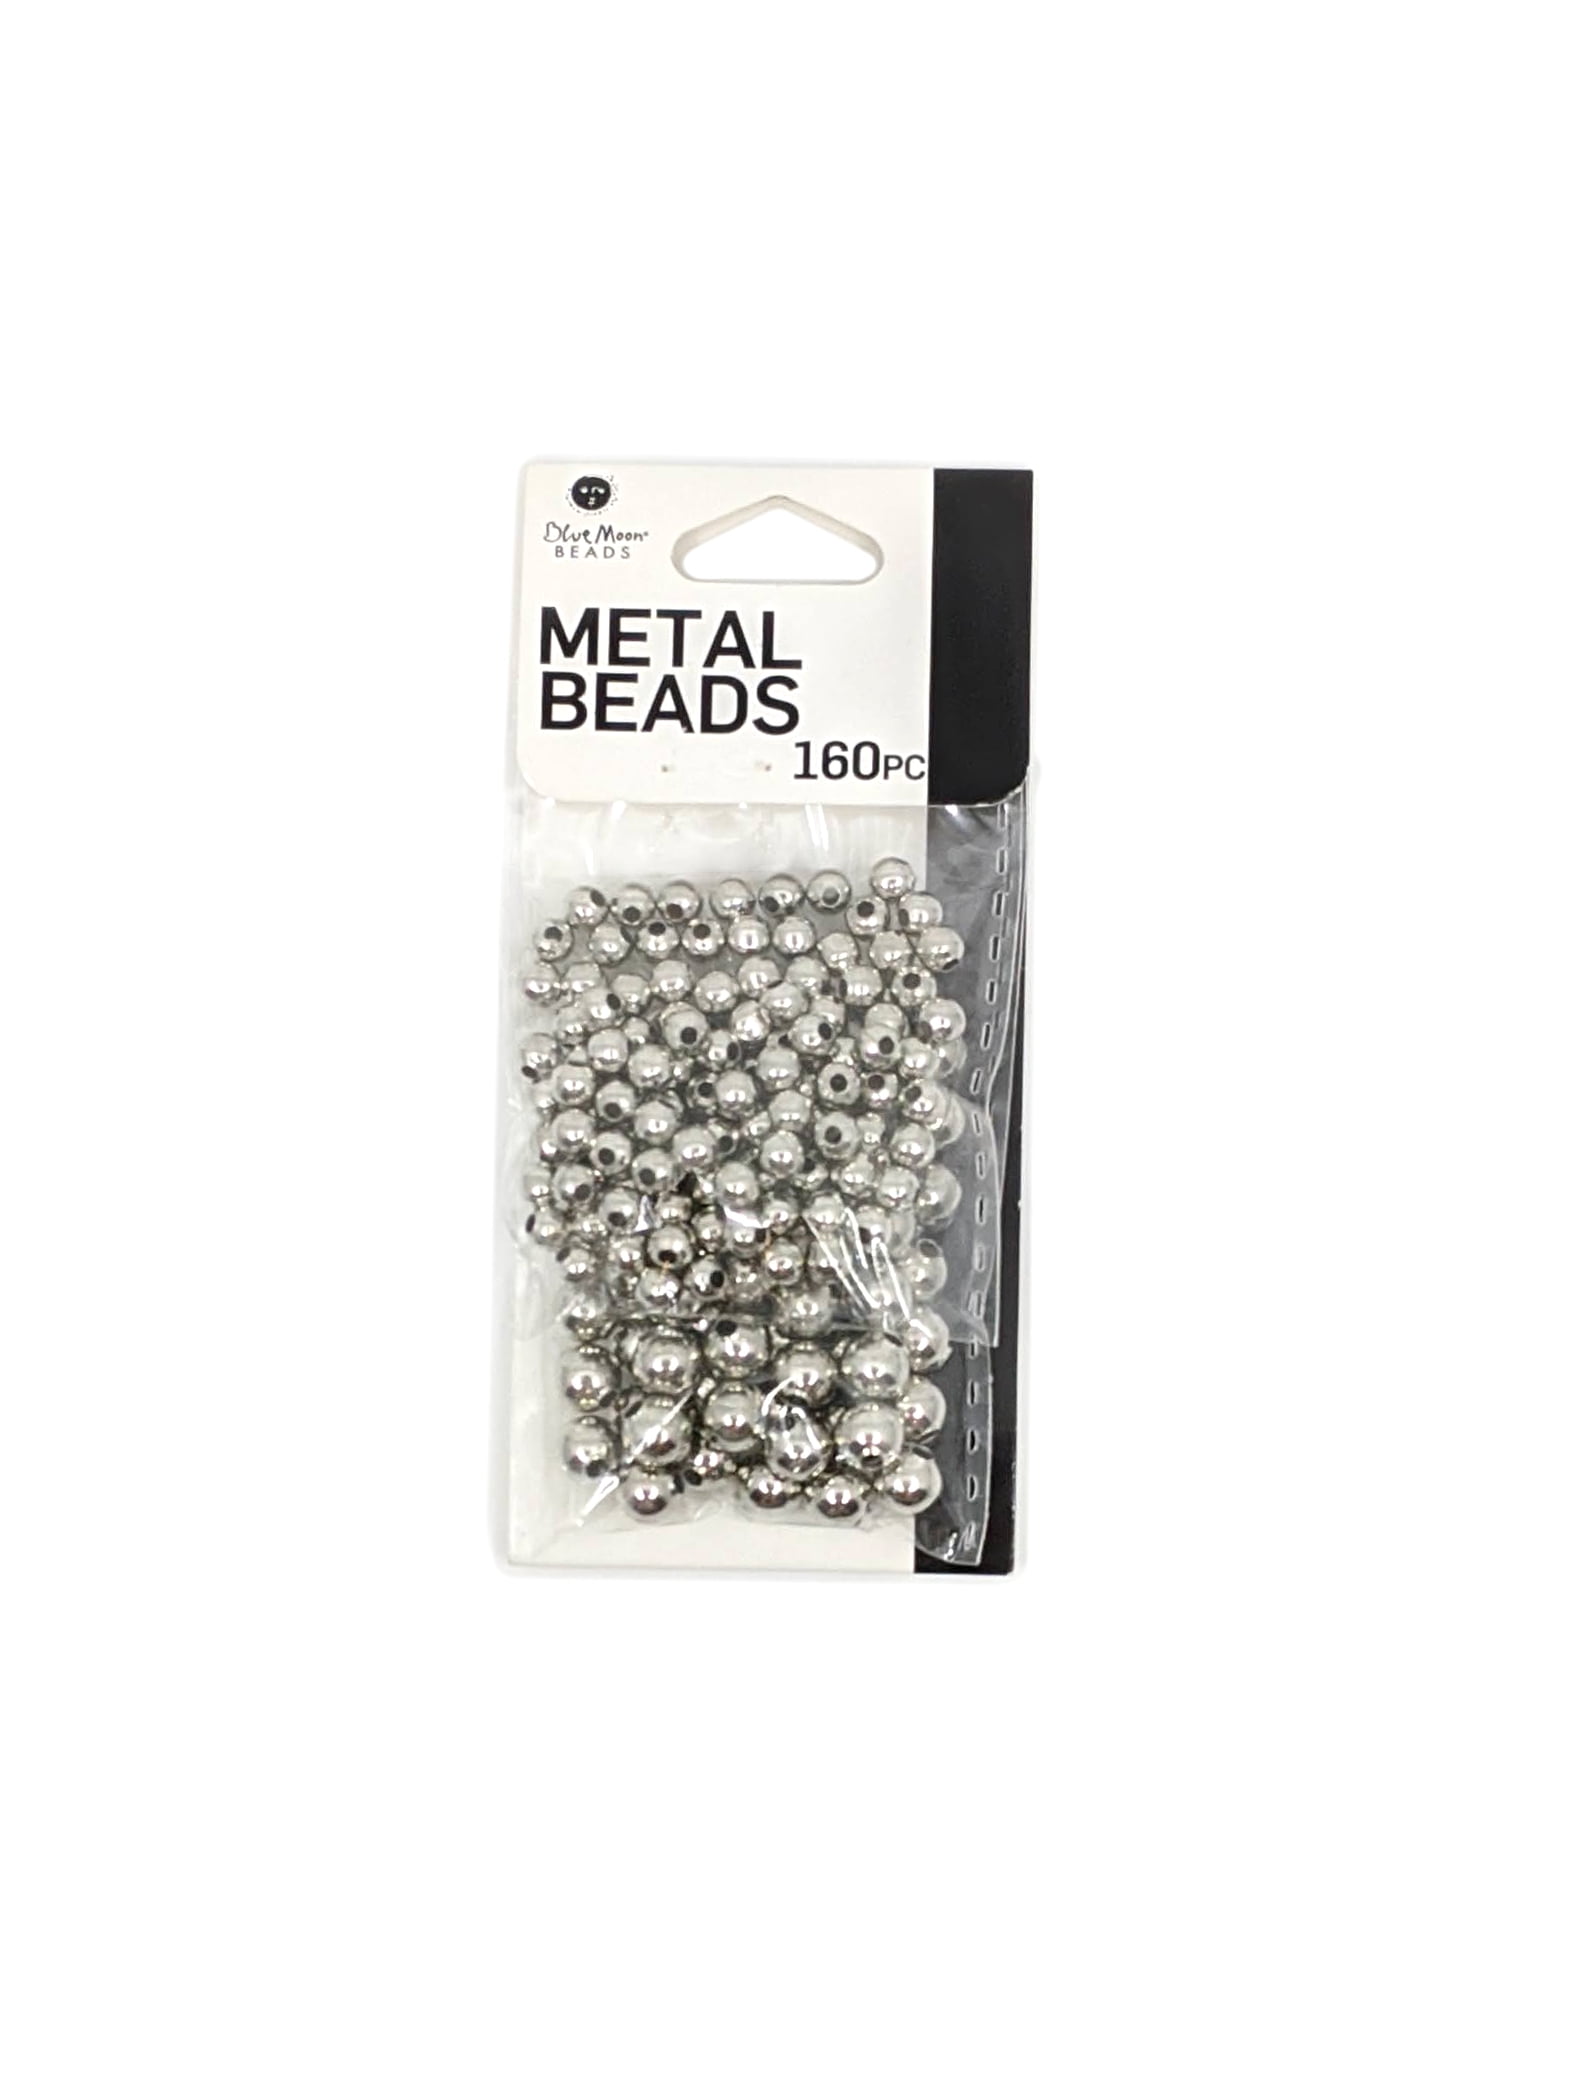 Blue Moon Beads Silver Metal Spacer Beads for Jewelry Making, 160 Piece